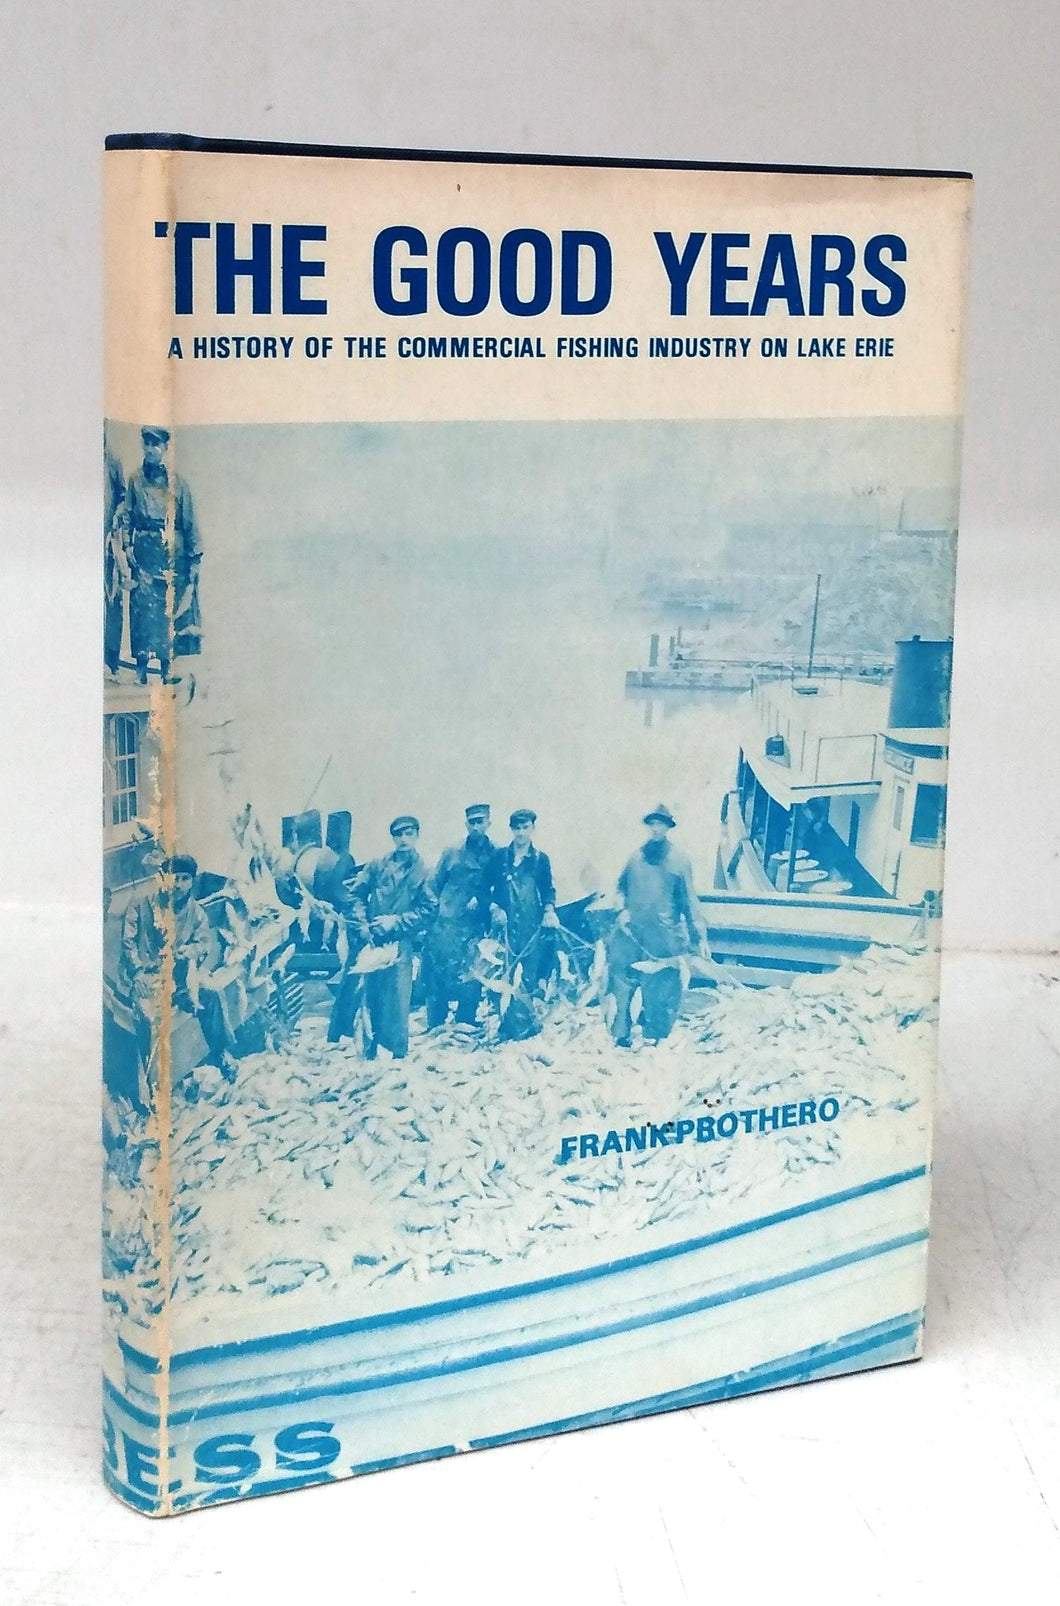 The Good Years: A History of the Commercial Fishing Industry on Lake Erie